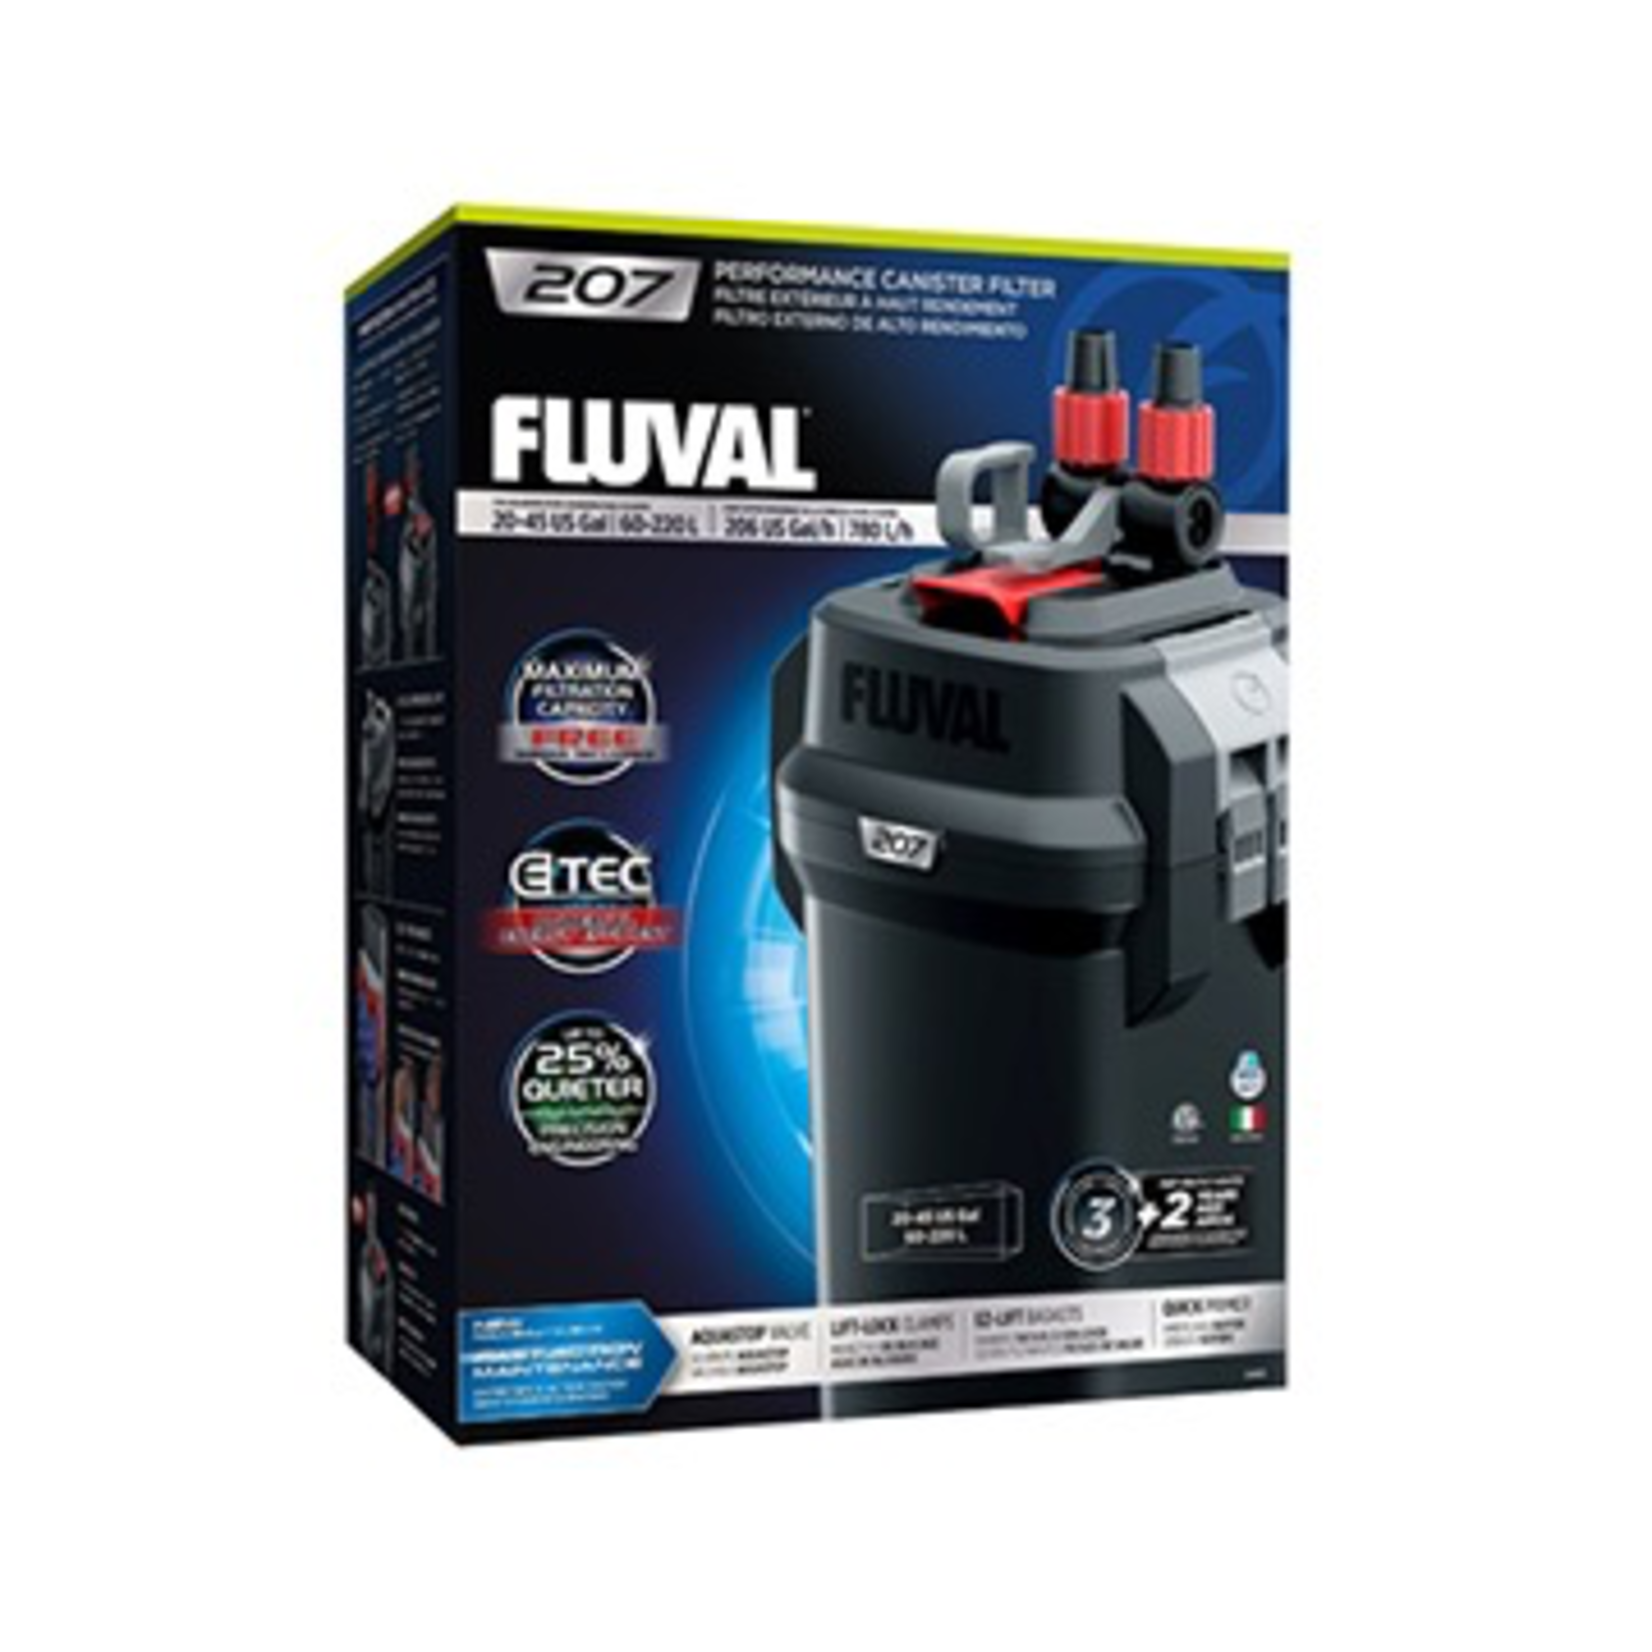 FLUVAL Fluval 207 Performance Canister Filter, up to 220 L (45 US gal)